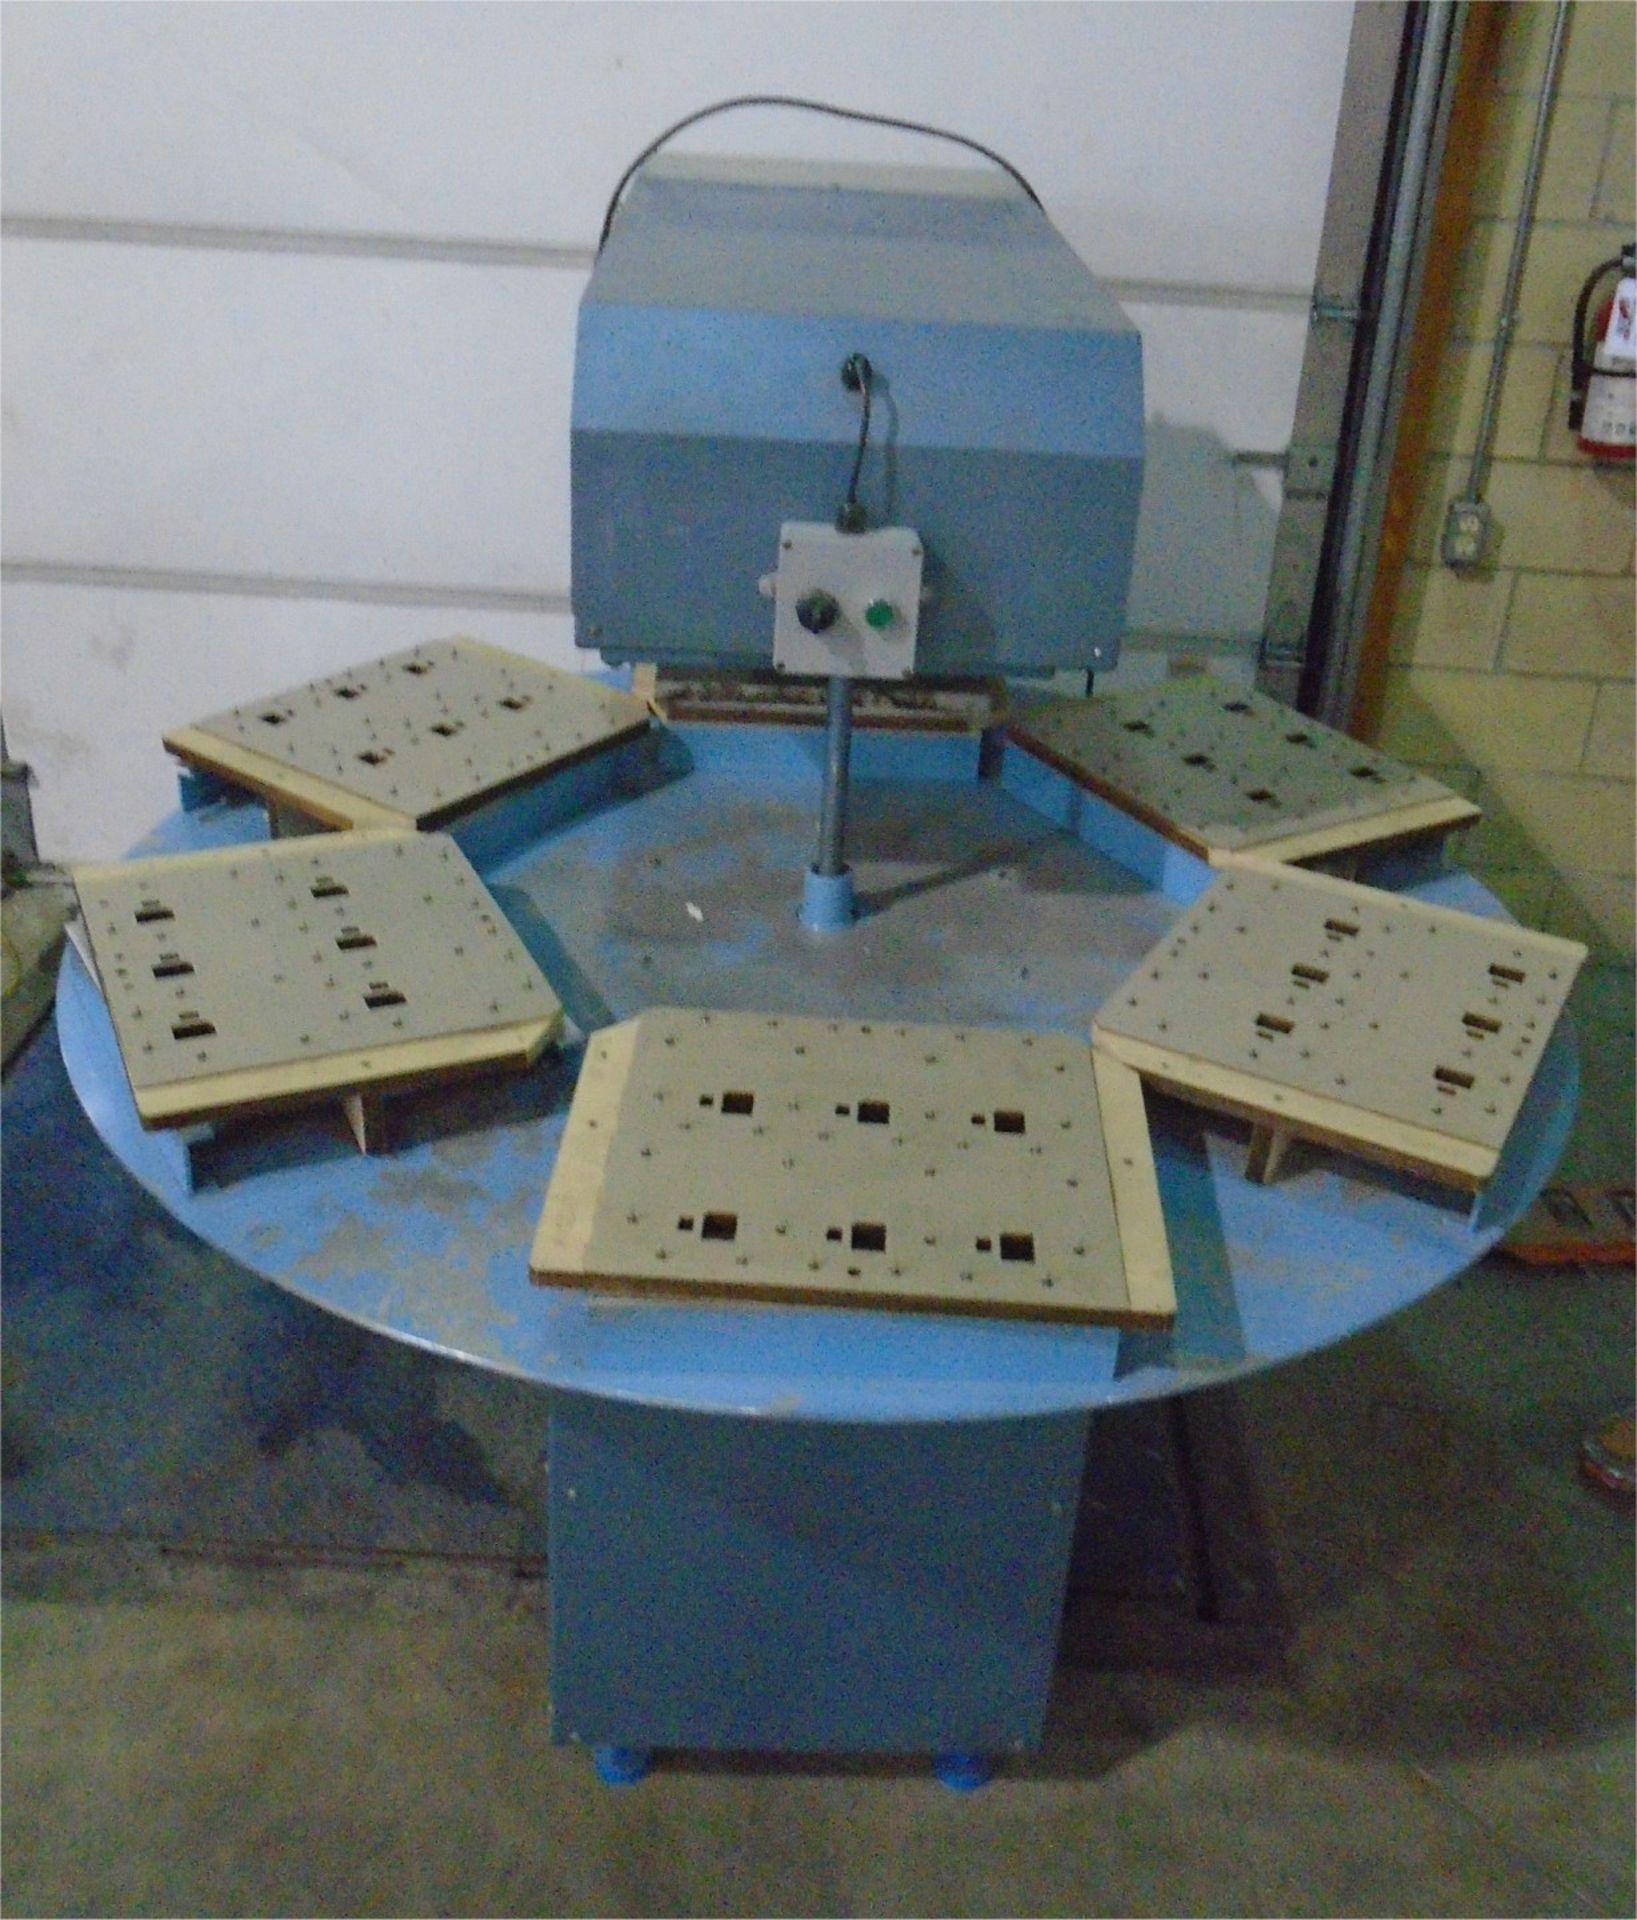 Used RBS Automatic Rotary Blister Machine Model TBS. Serial #20-123. This is a 6 station Rotary